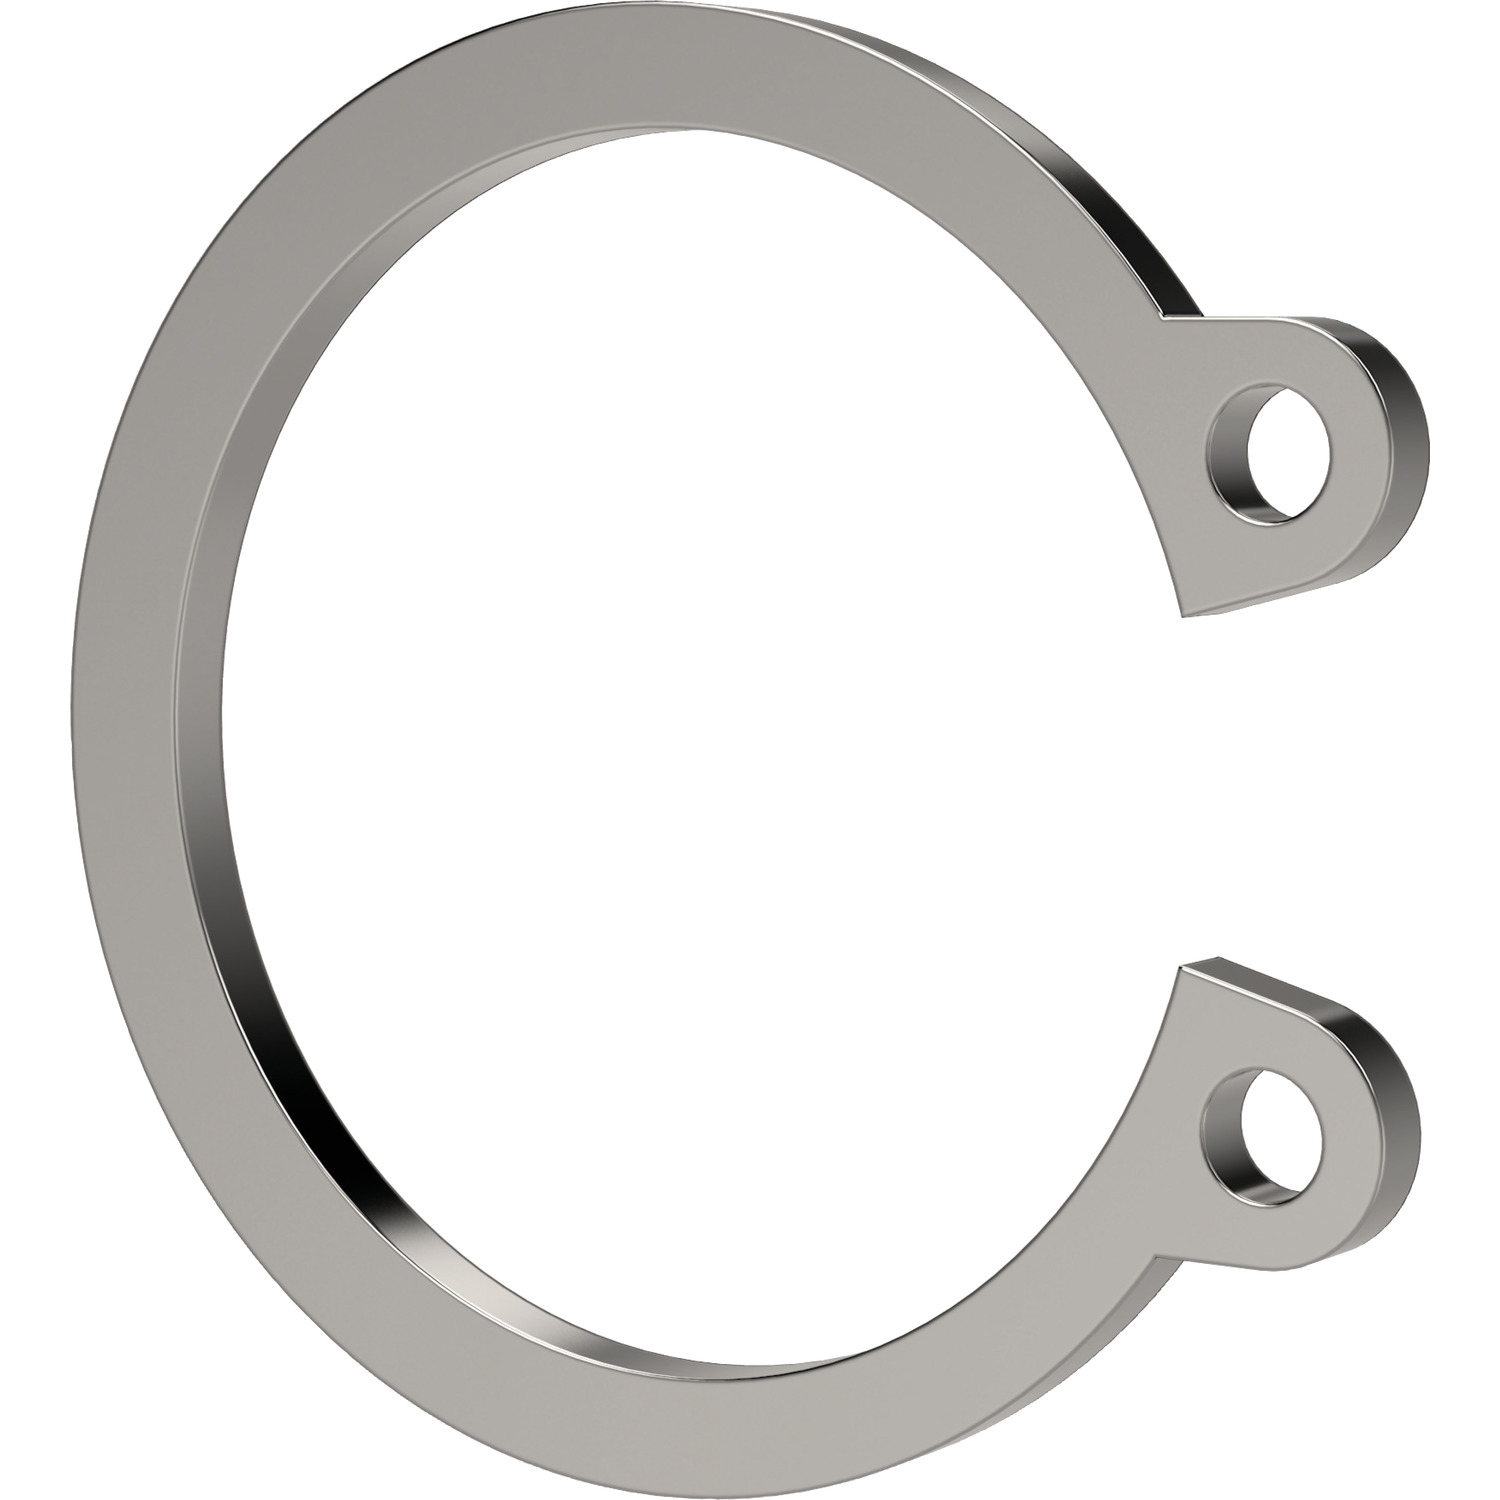 Stainless Circlips Stainless Steel circlips, manufactred to DIN 471. For use with R3454 and R3402-R3403.